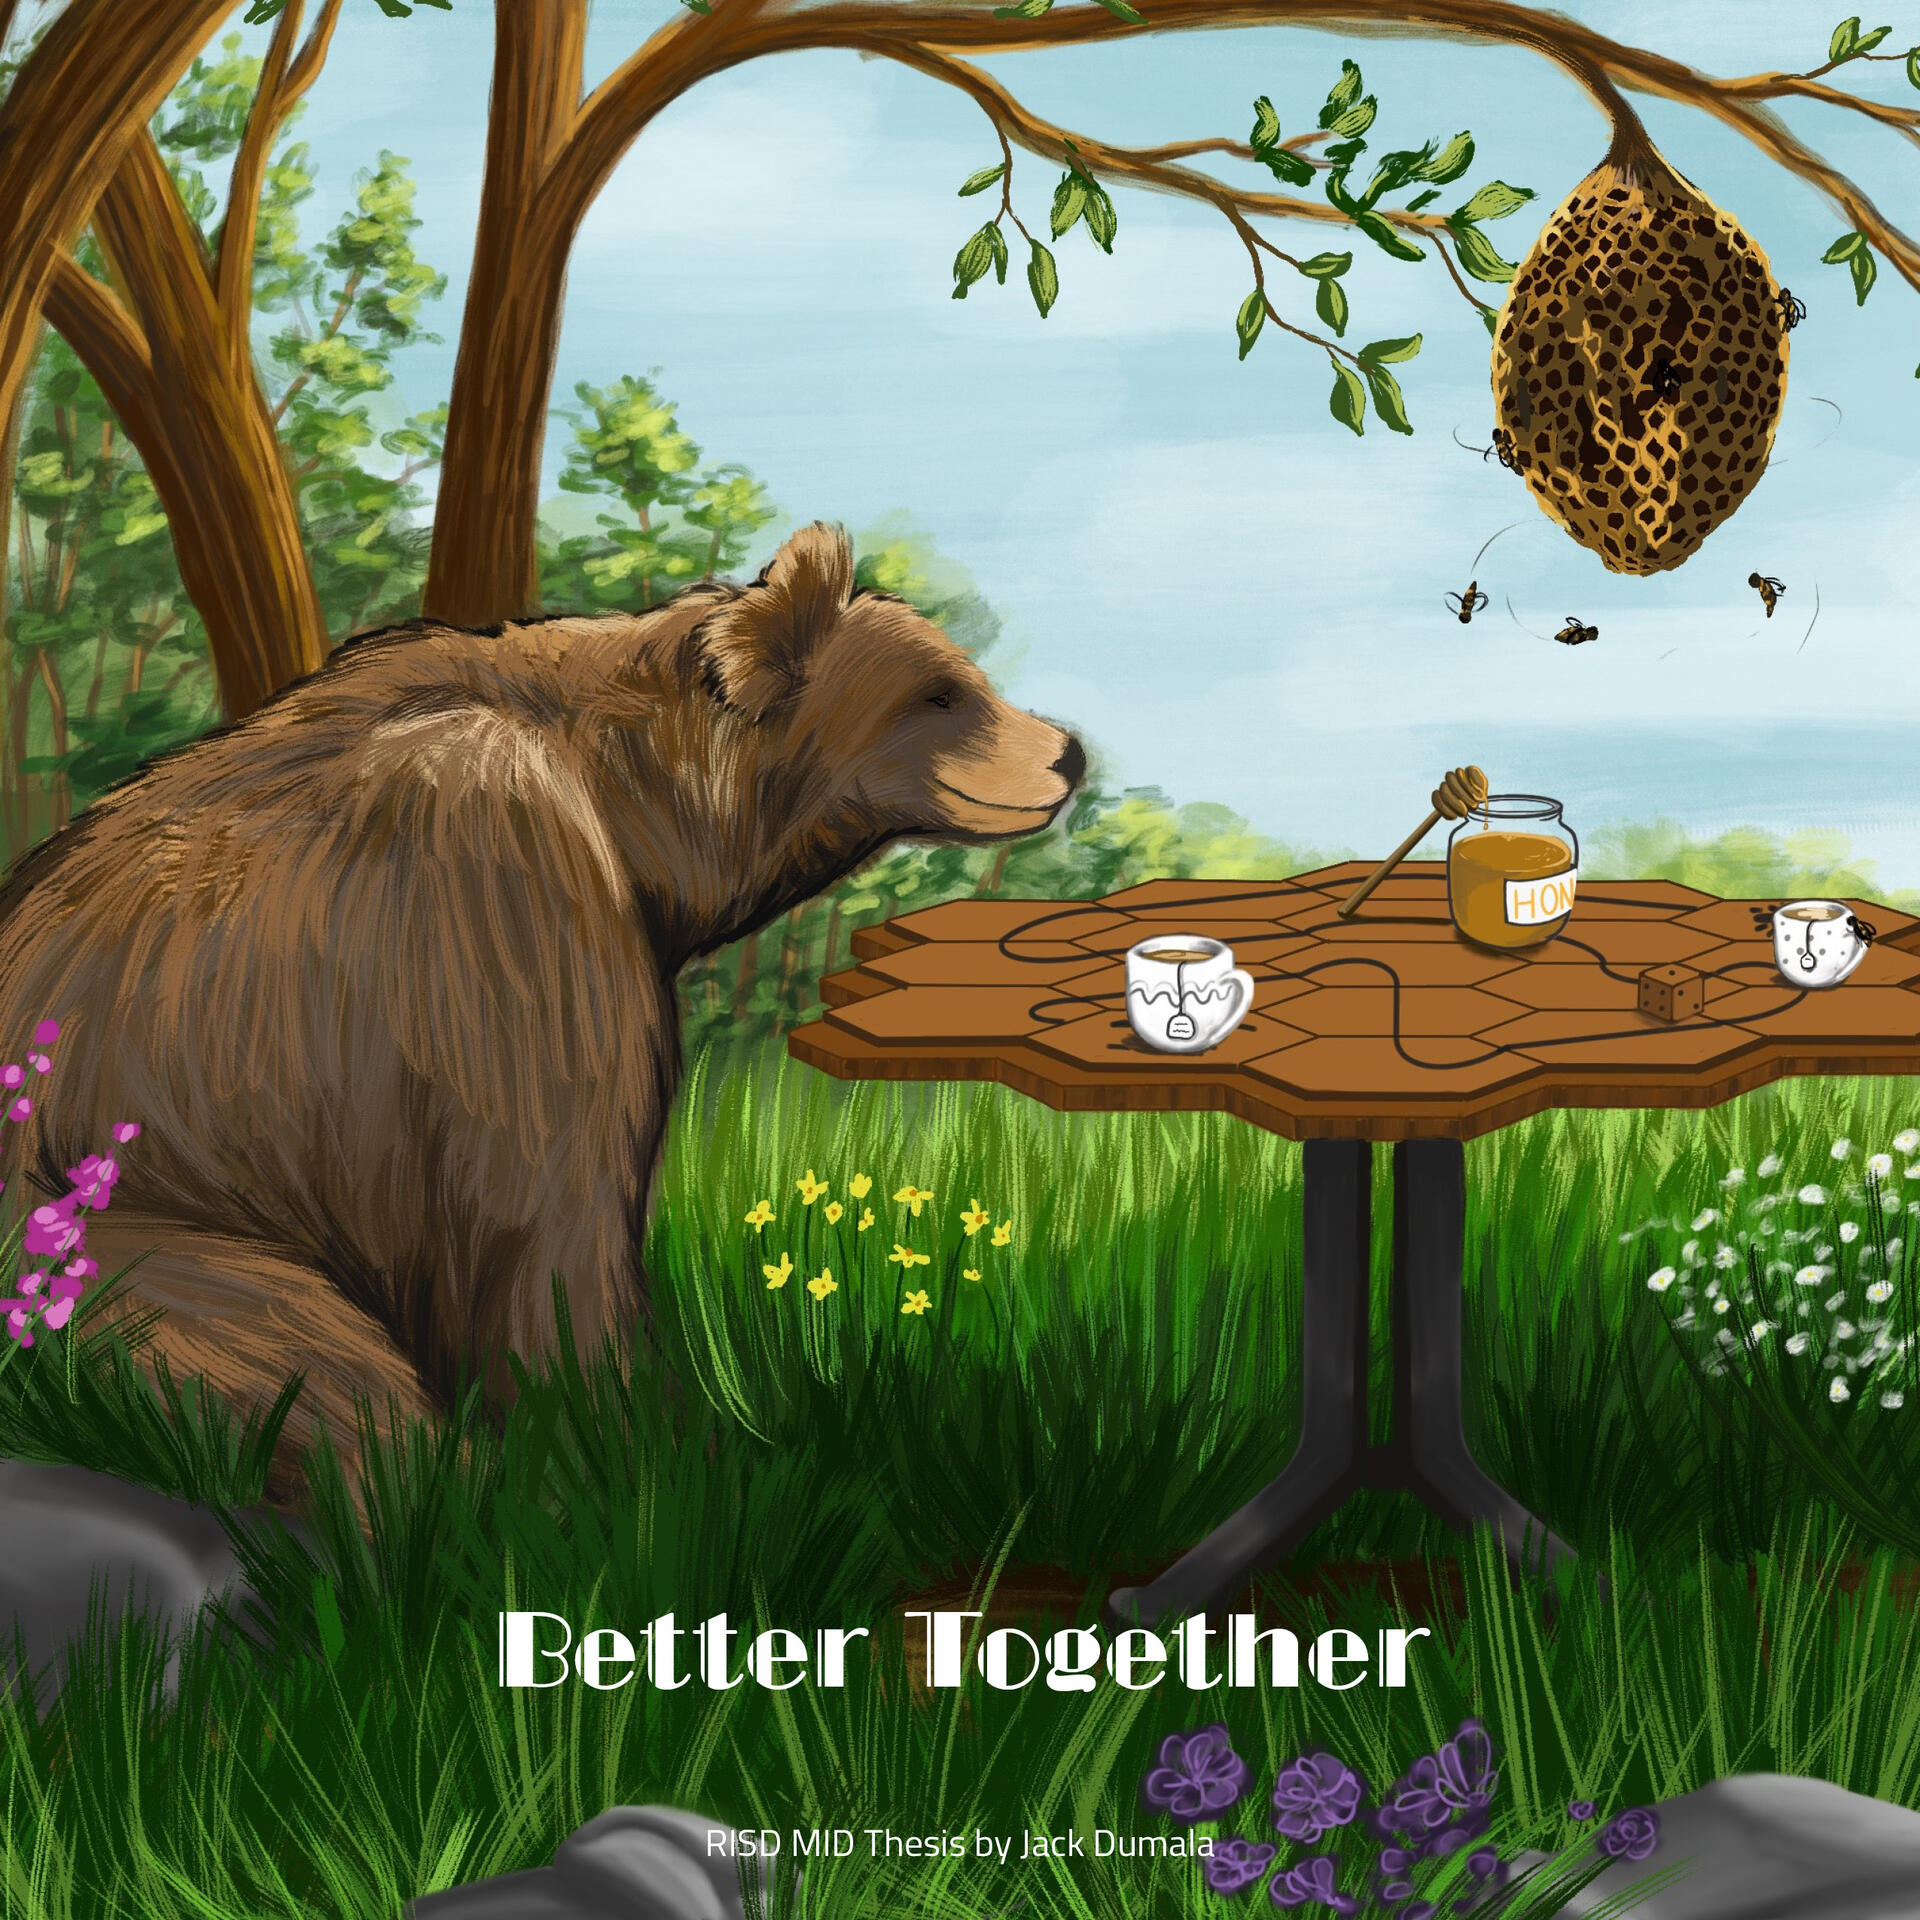 Greenery and Nature, Honeycomb game table, bee hive, brown bear sitting on ground, honey, tea time